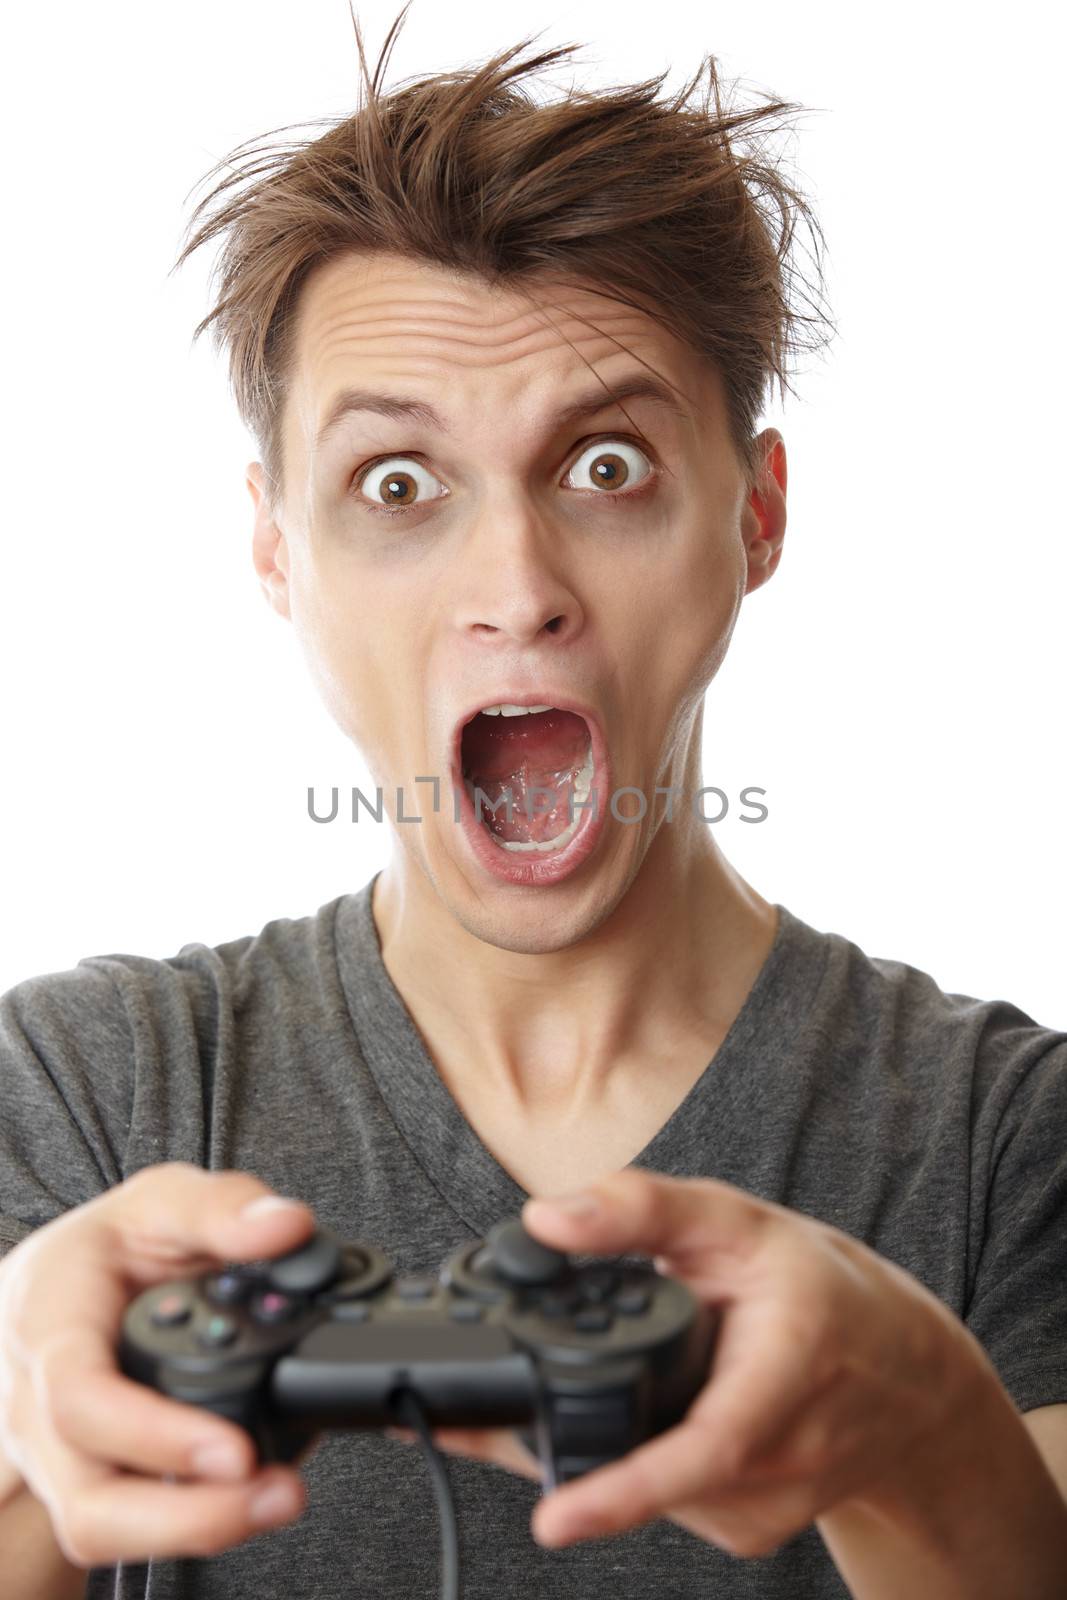 Crazy man in trouble playing video game using joystick